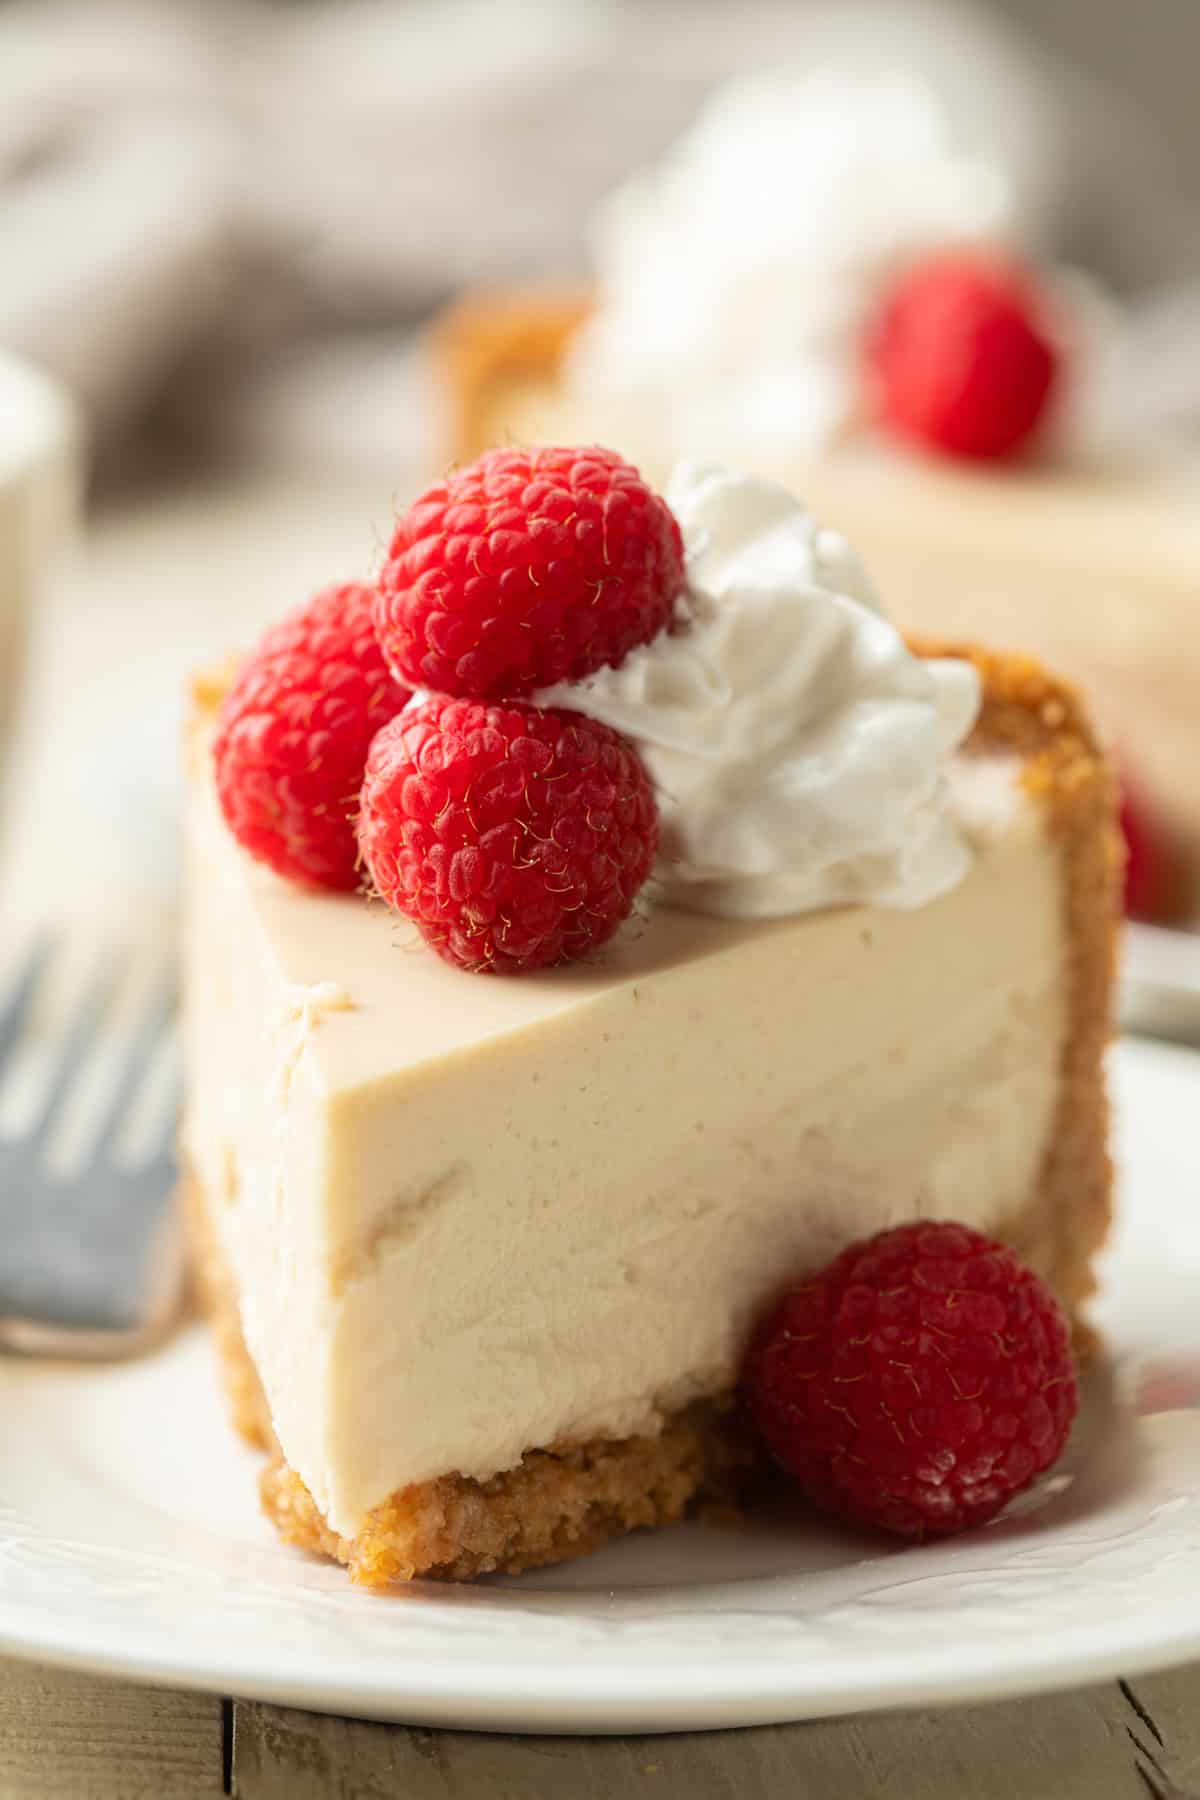 Vegan Cheesecake slice on a plate with raspberries and fork.